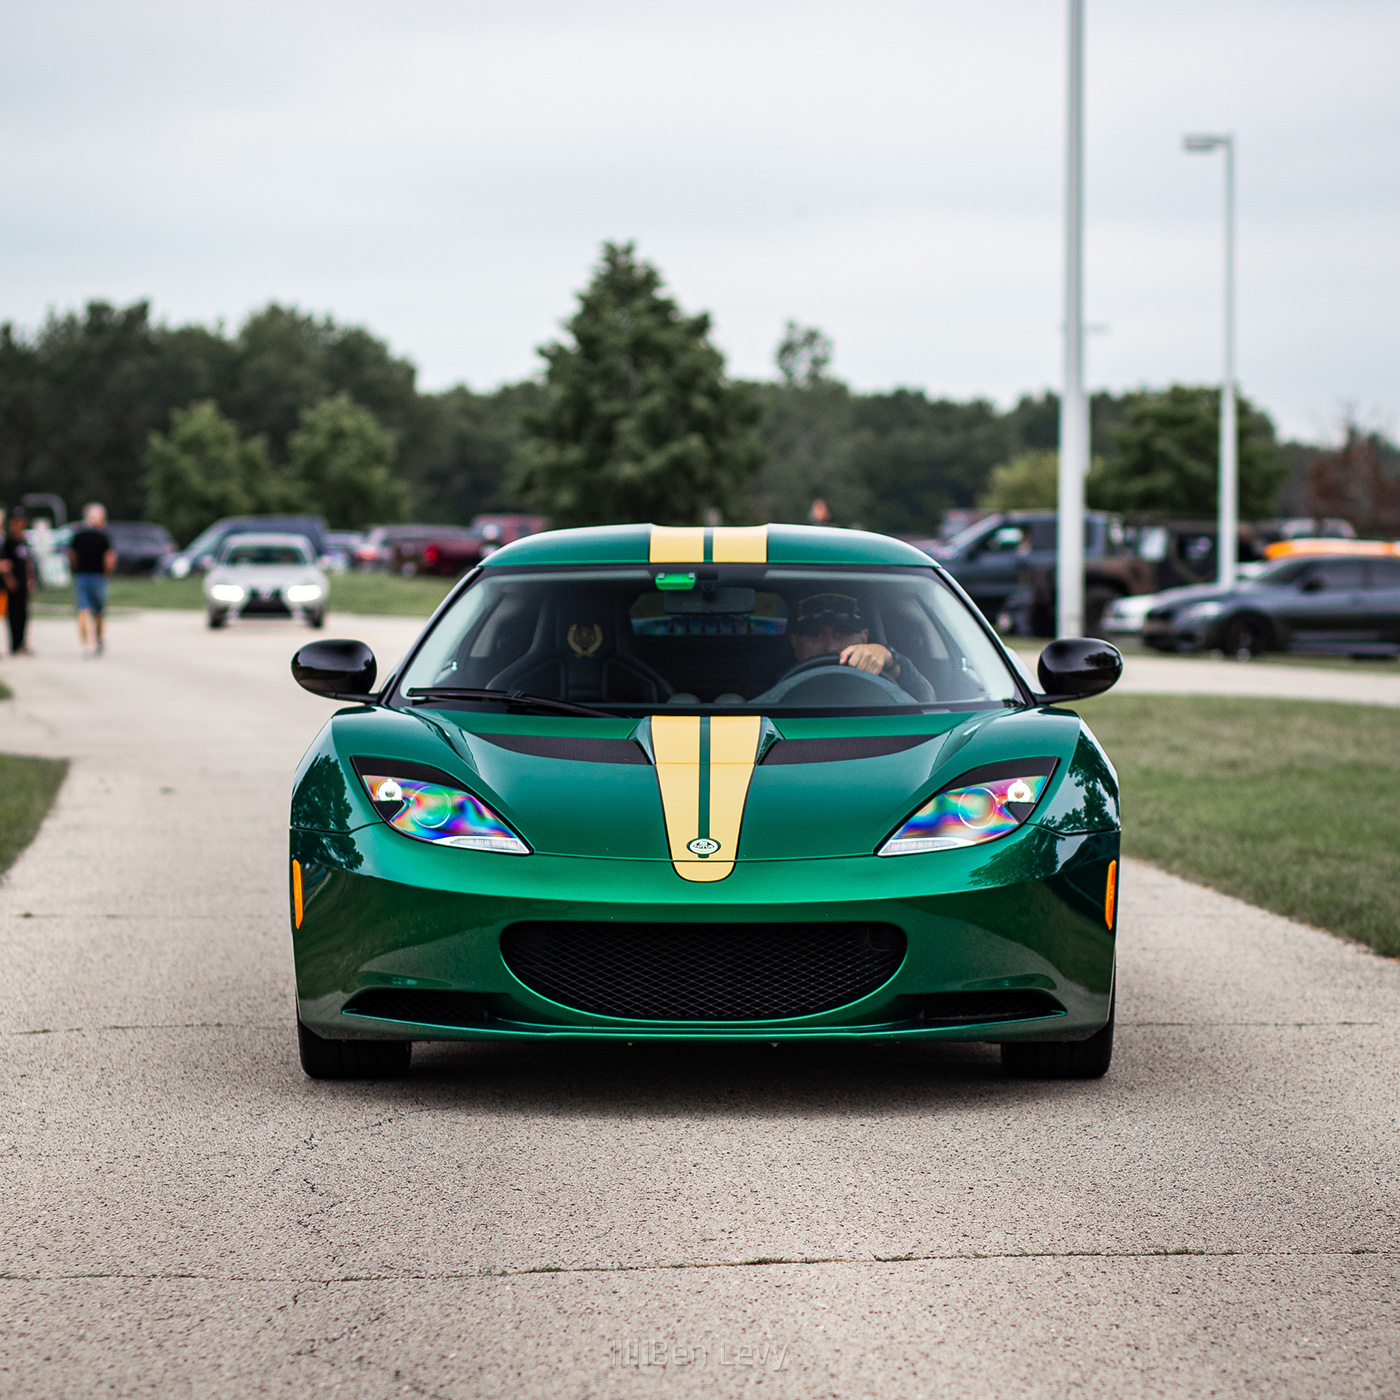 Front of Green Lotus Evora S Heritage Racing Edition